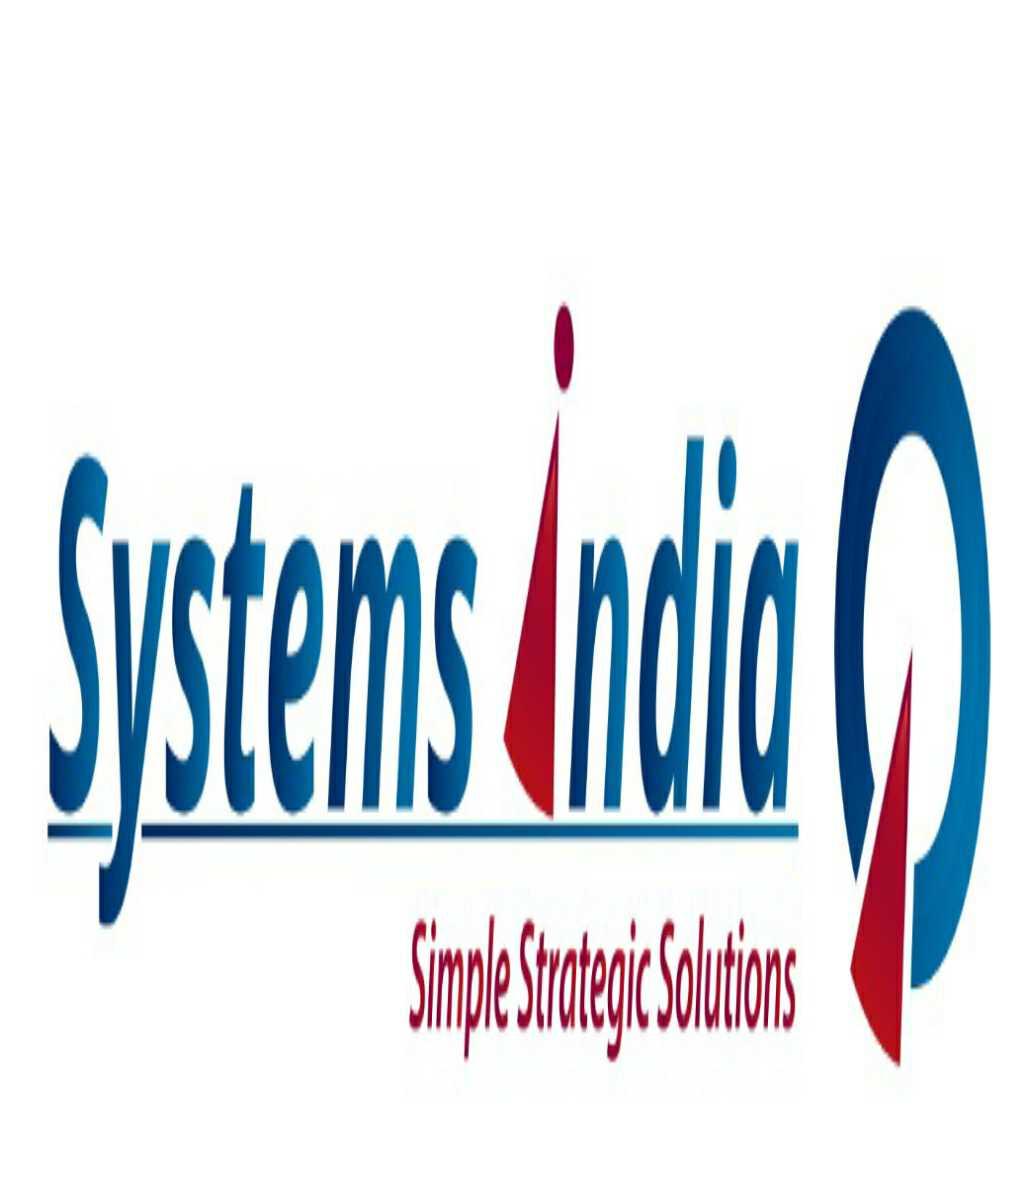 Systems India